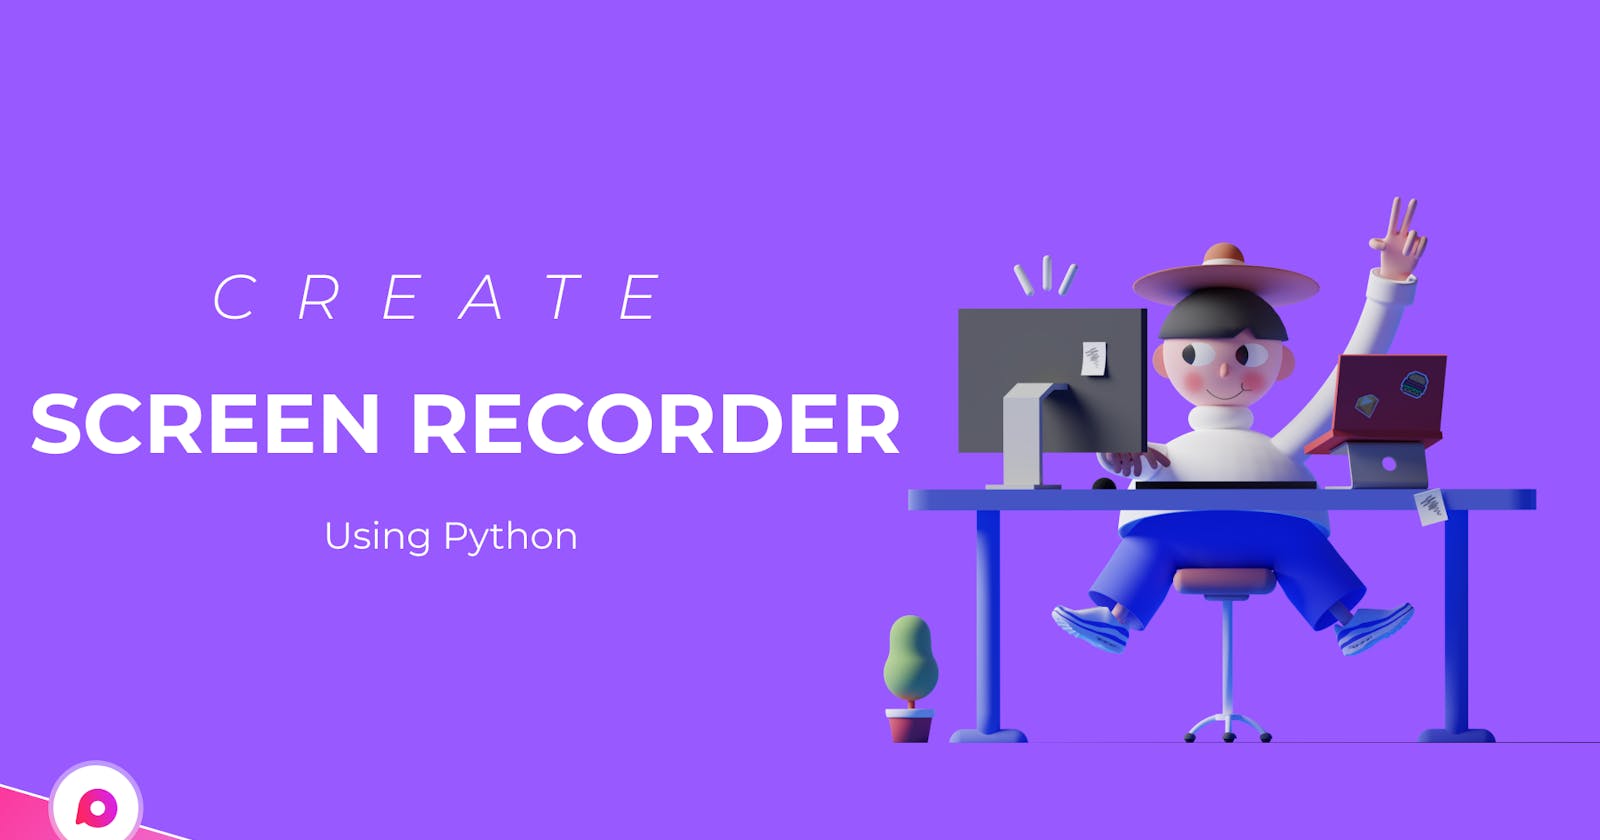 How to Create a Screen Recorder Using Python